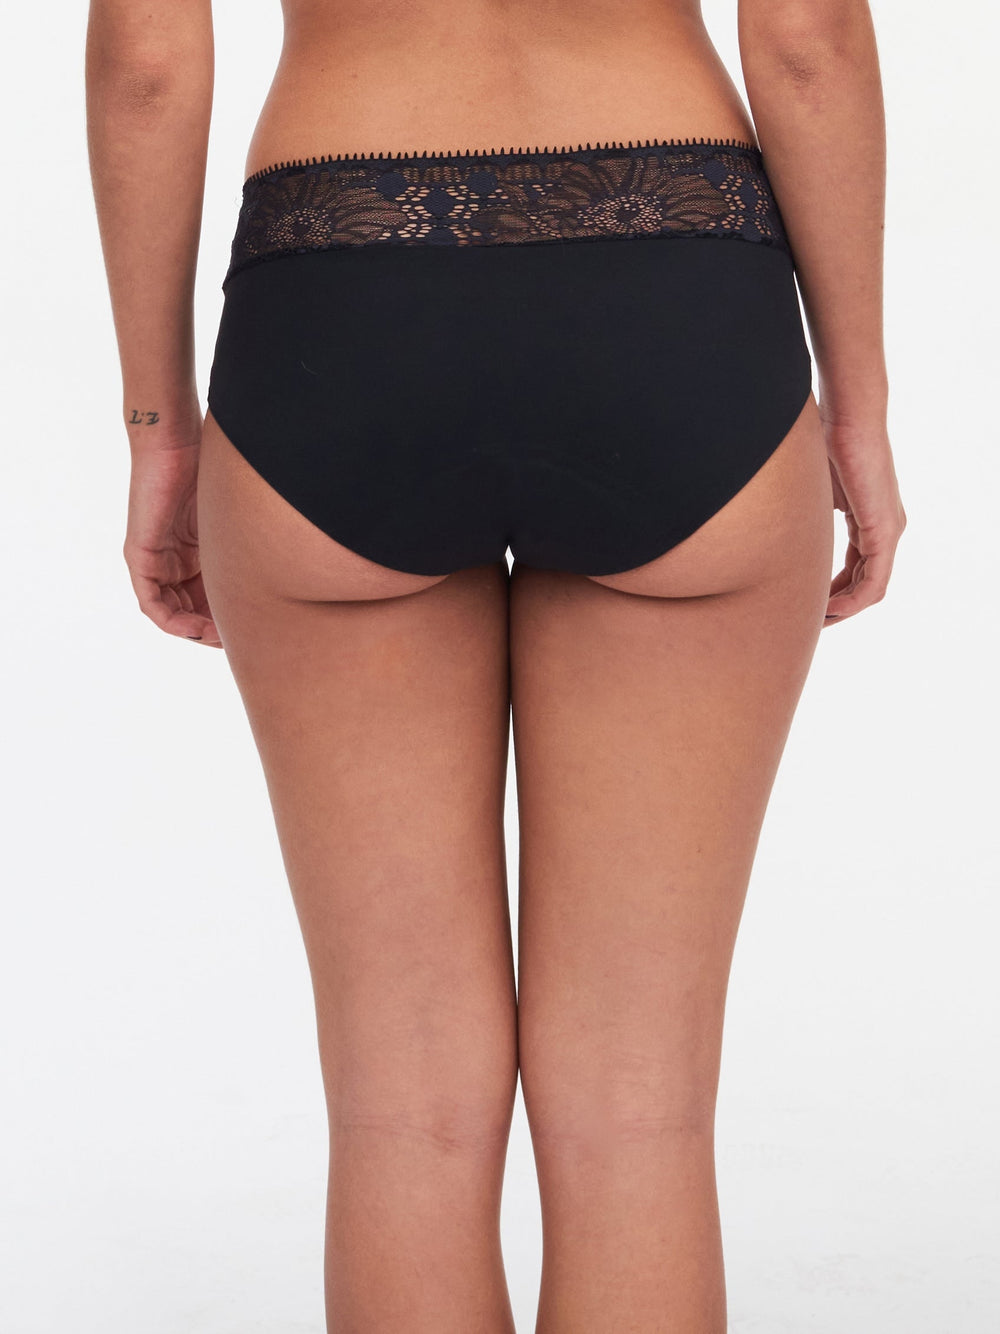 Chantelle Life Lace Hipster - Black Brief Chantelle 